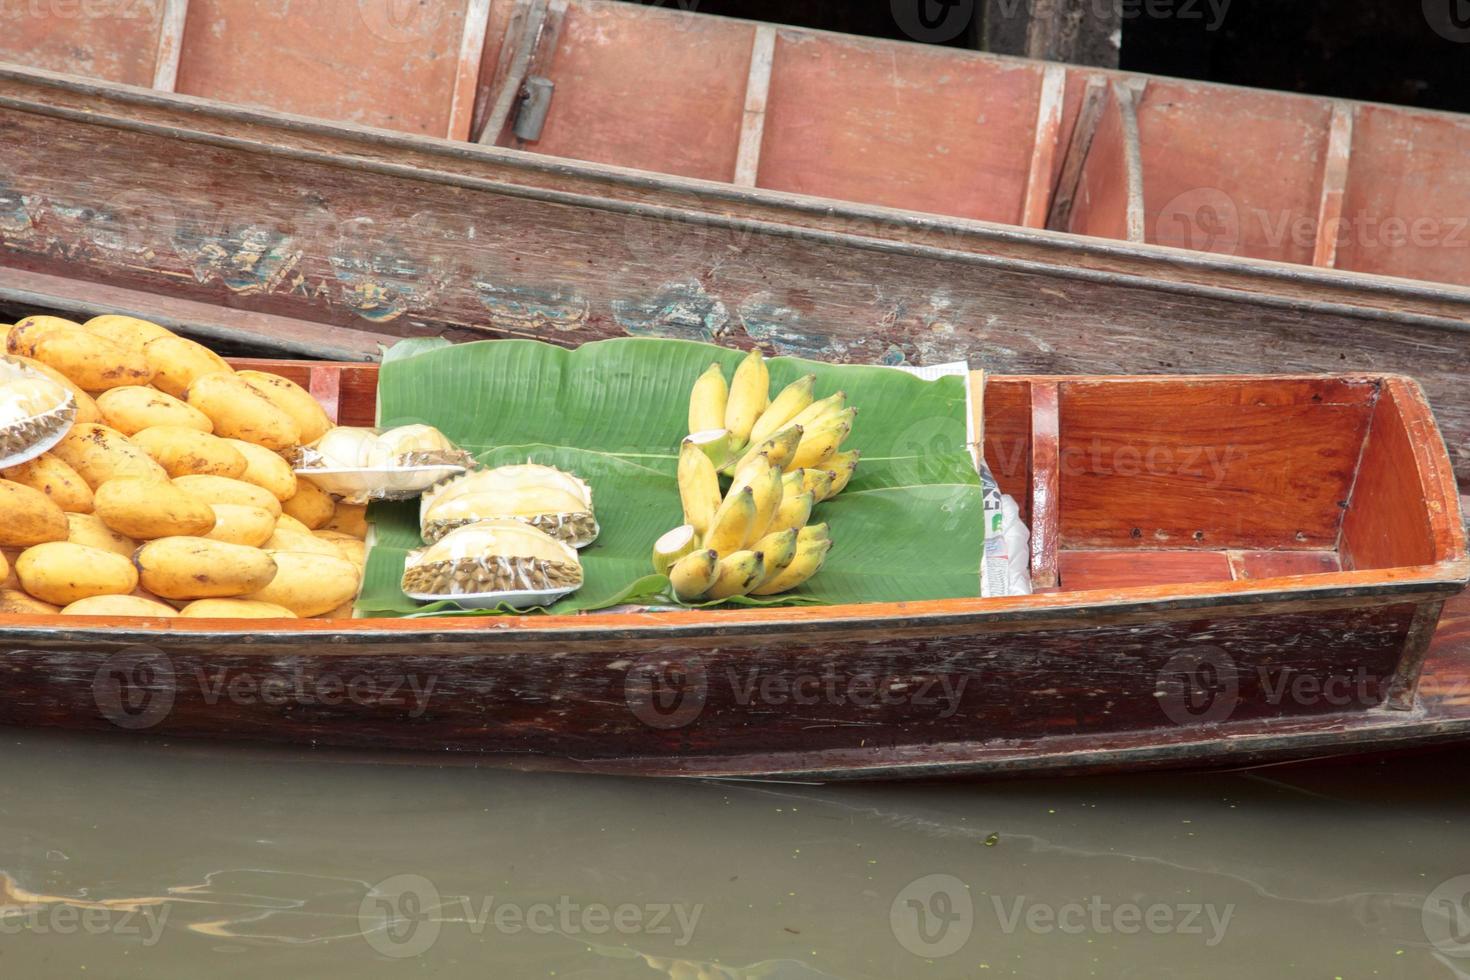 Boats selling fruit - ripe mango - in Damnoen Saduak Floating Market is a popular tourist destination that Europeans and Chinese like to travel with the traditional way of life of the villagers. photo